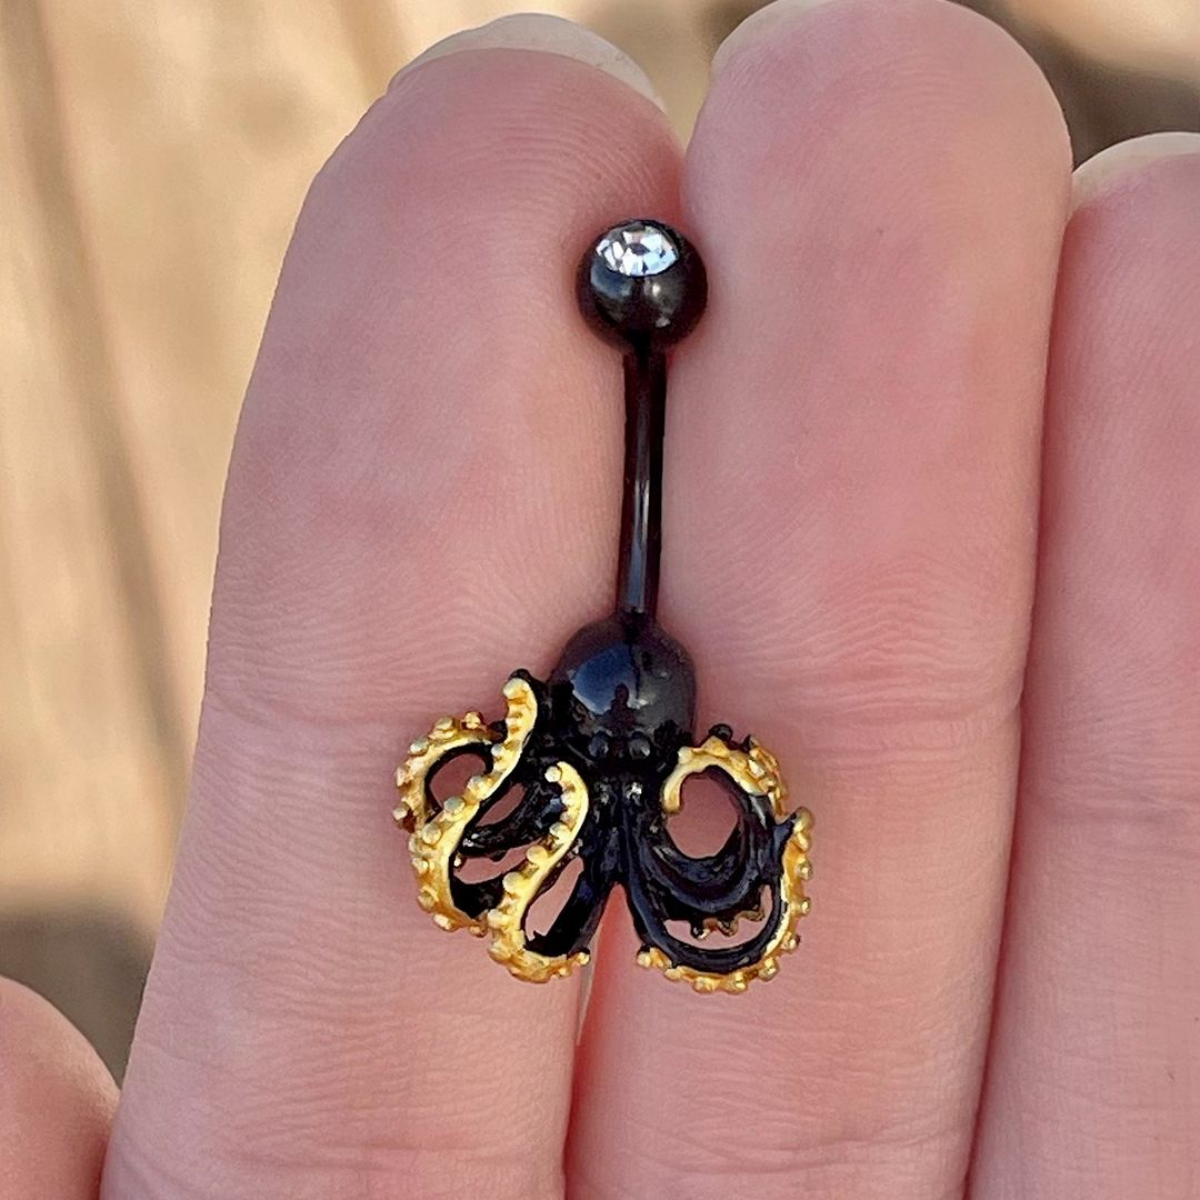 13 belly button piercings black octopus charm